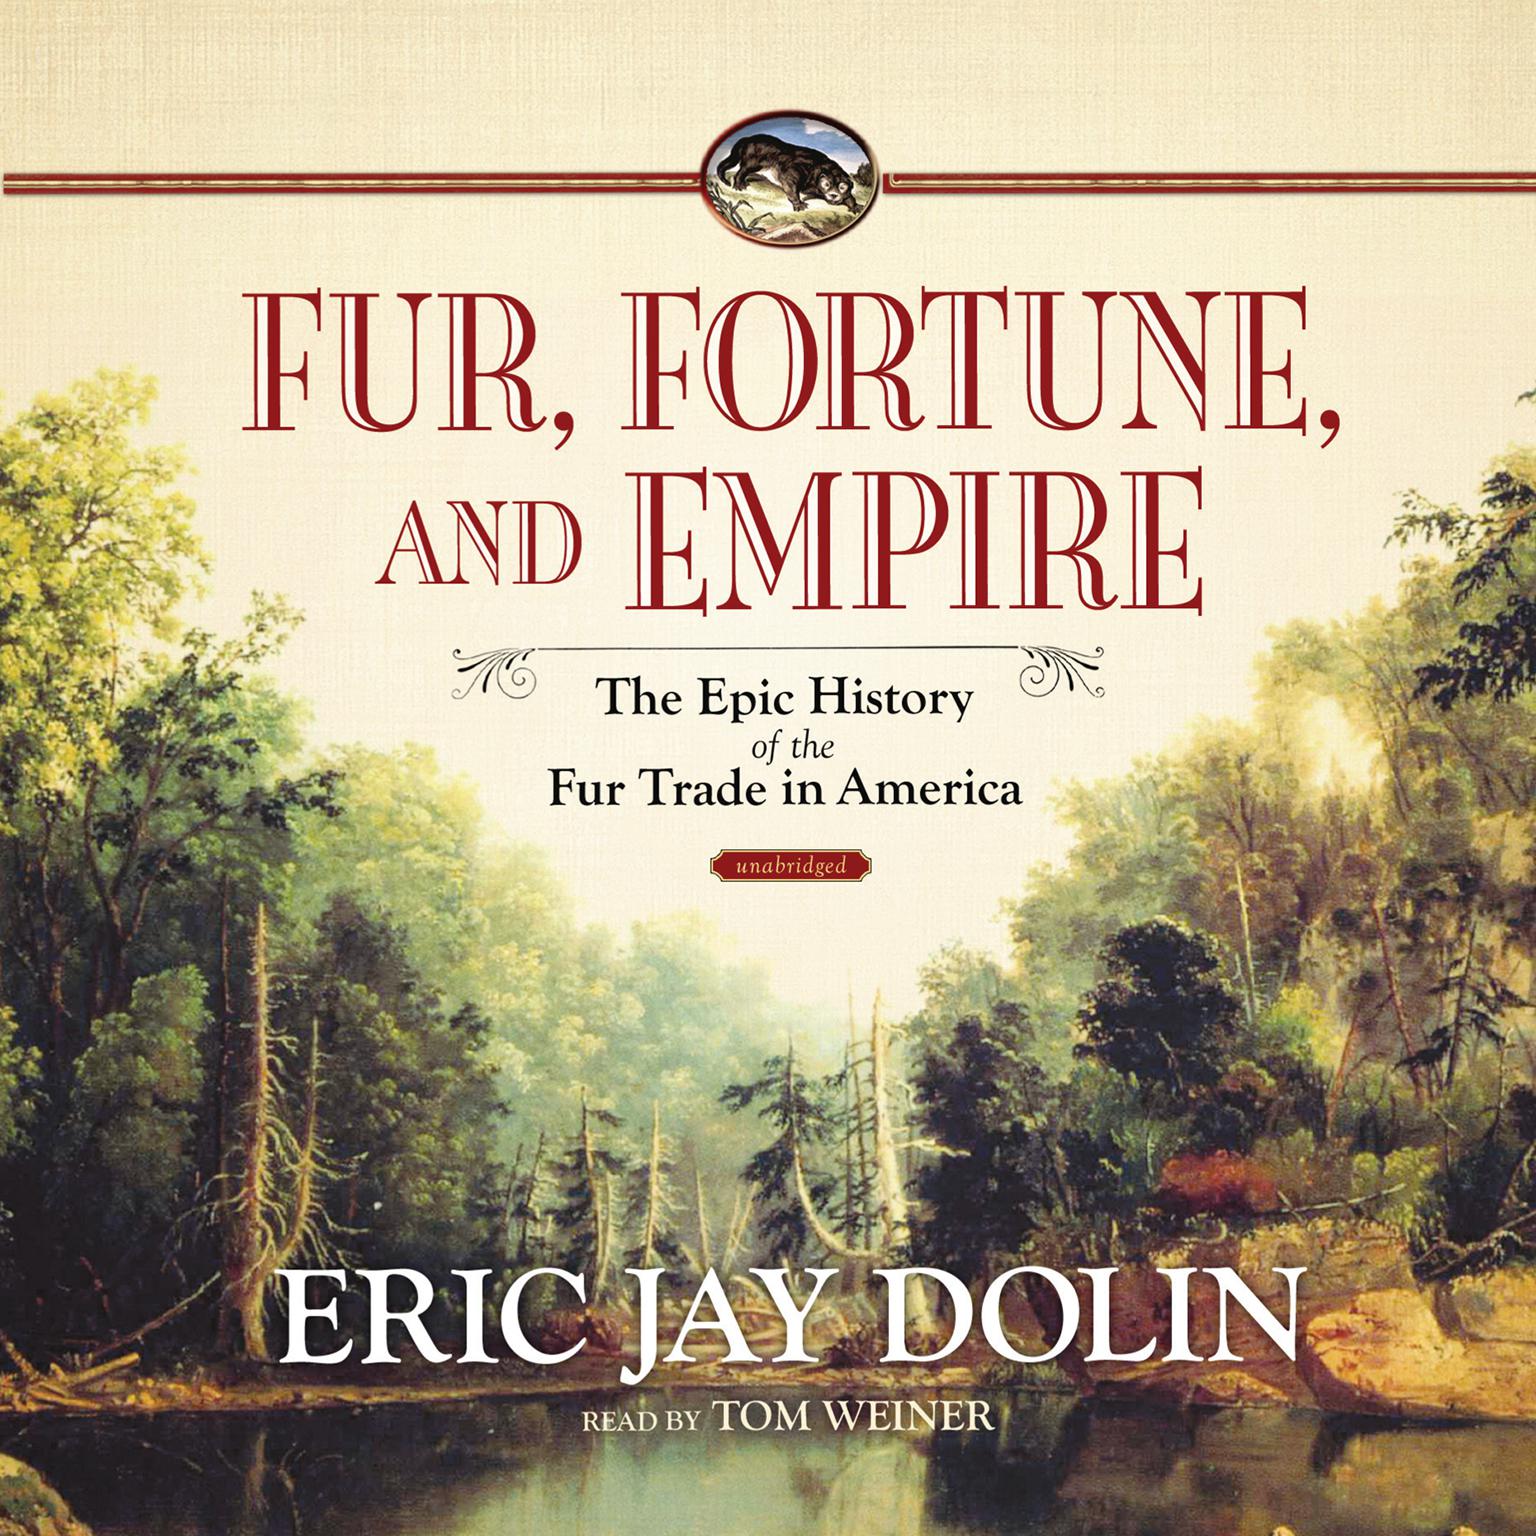 Fur, Fortune, and Empire: The Epic History of the Fur Trade in America Audiobook, by Eric Jay Dolin